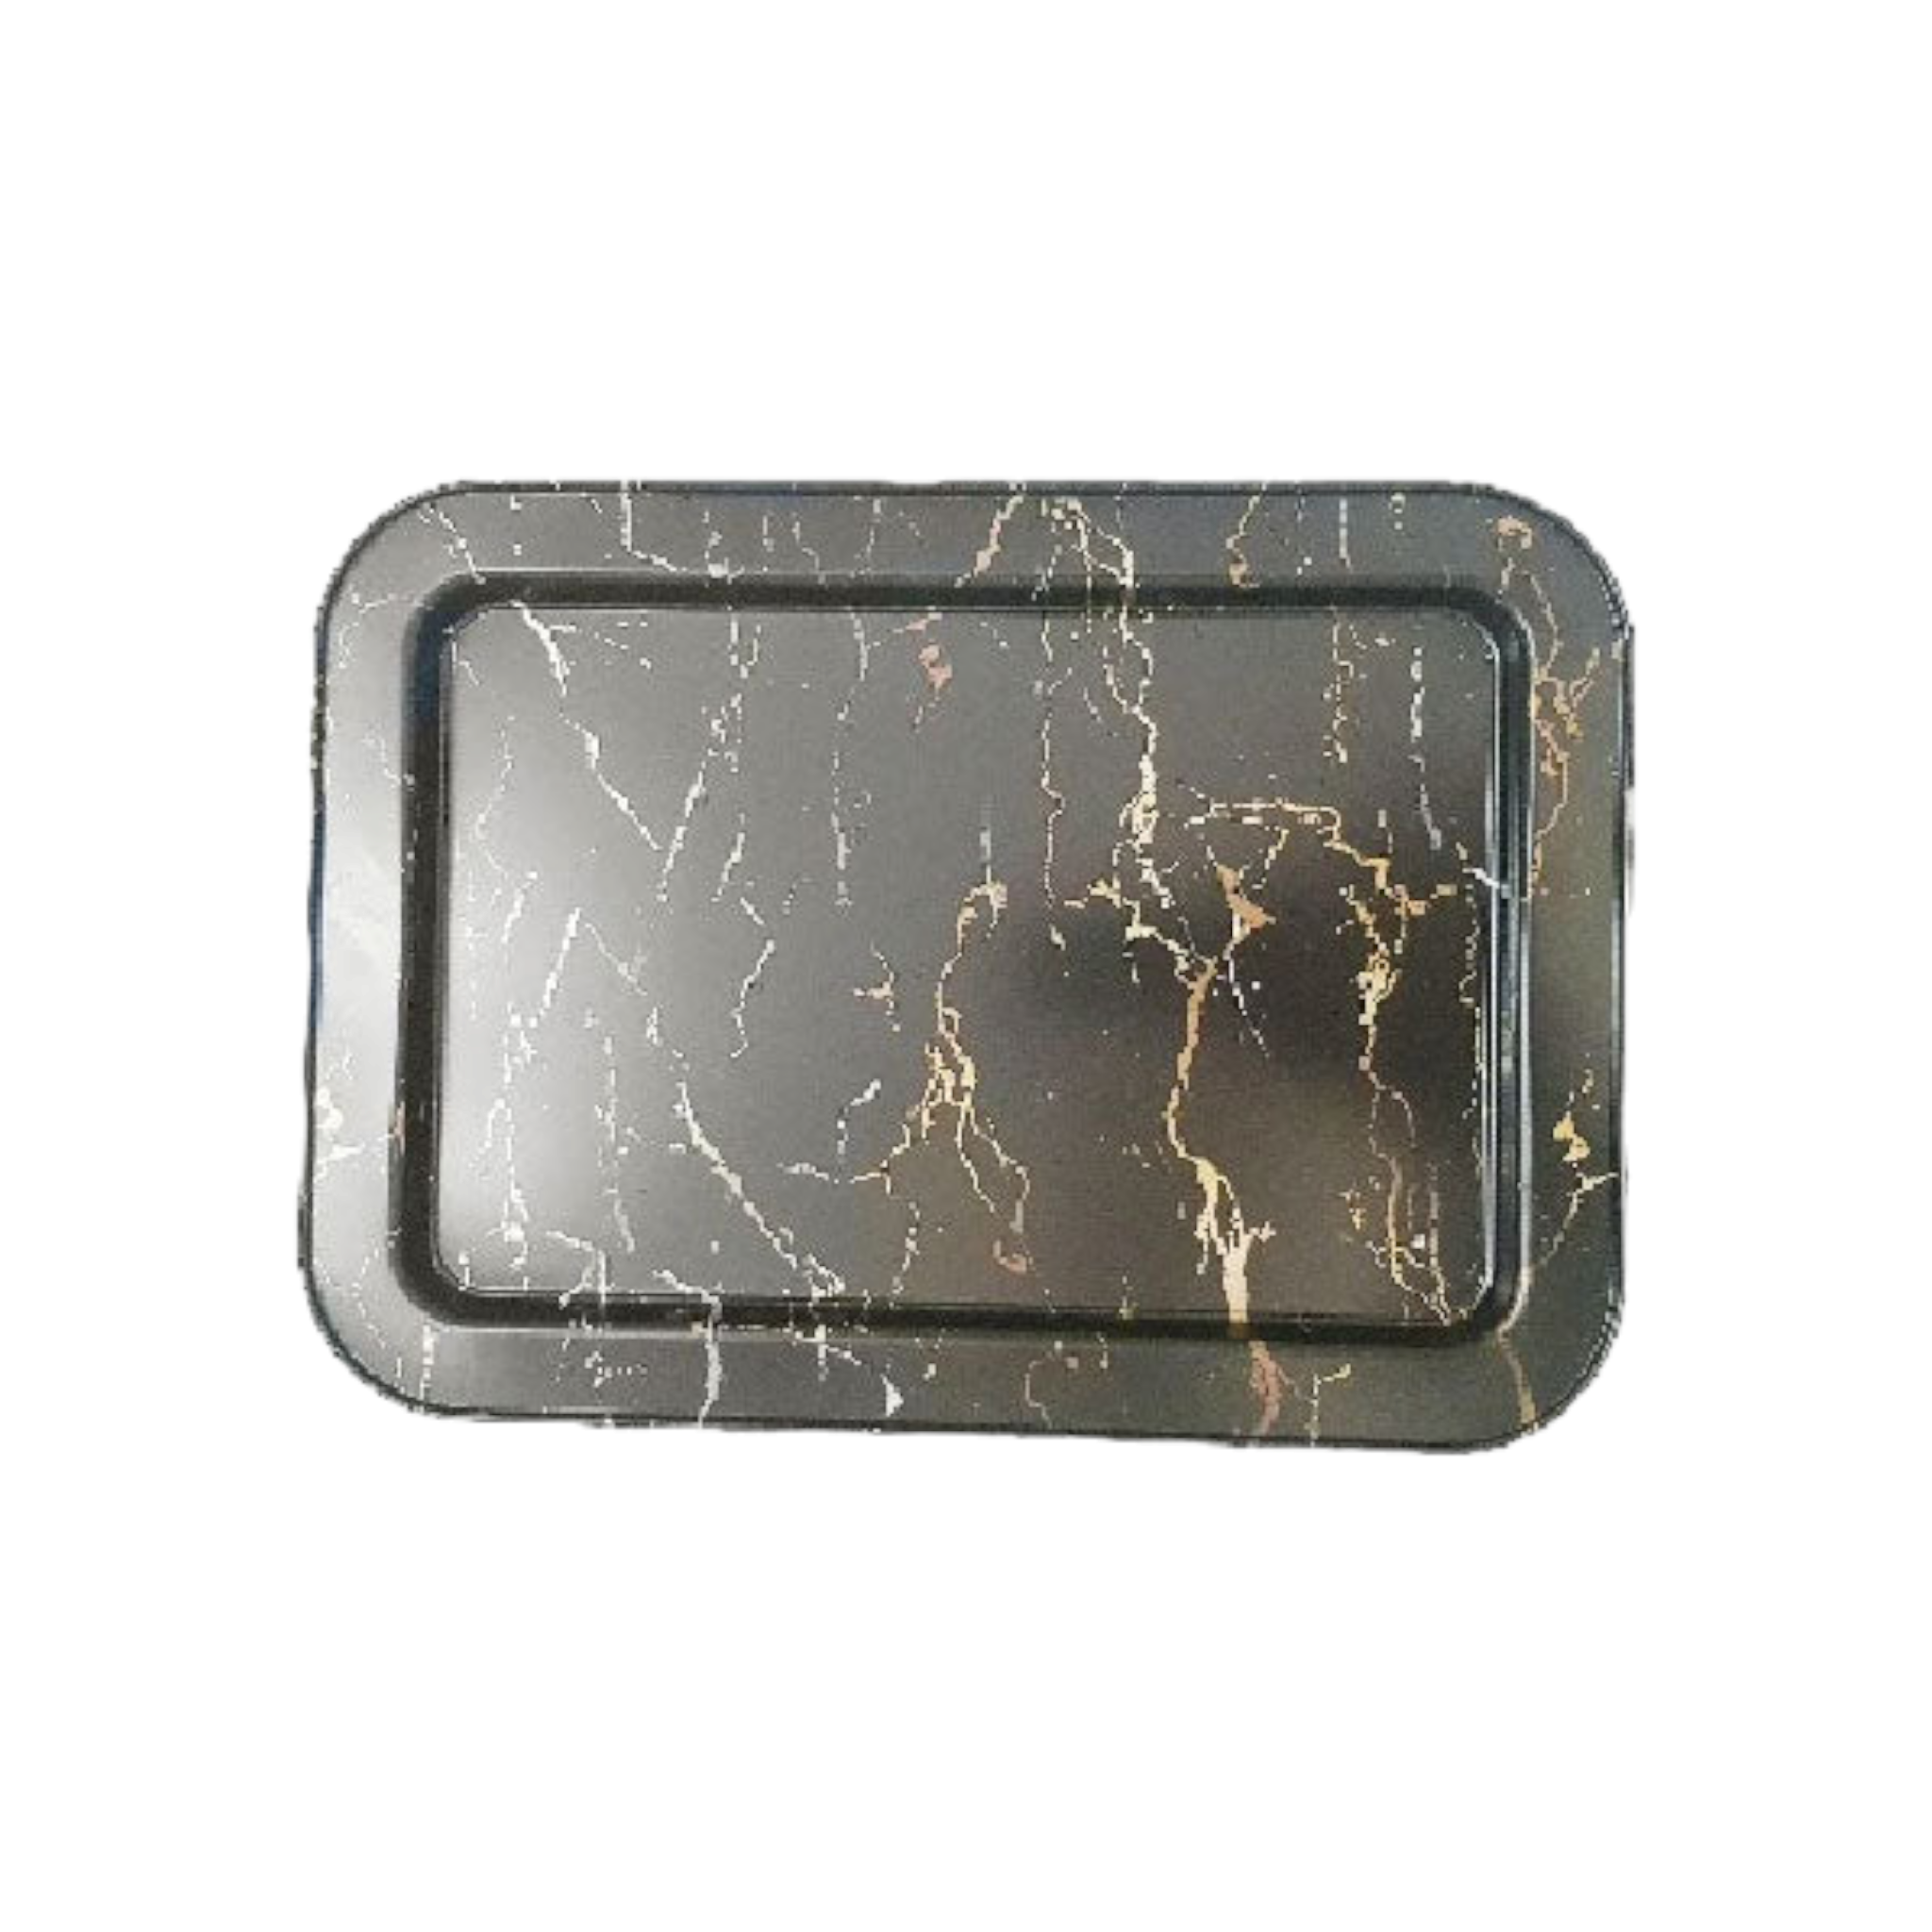 Continental Homeware Serving Tray Black Marble Print White Ch612